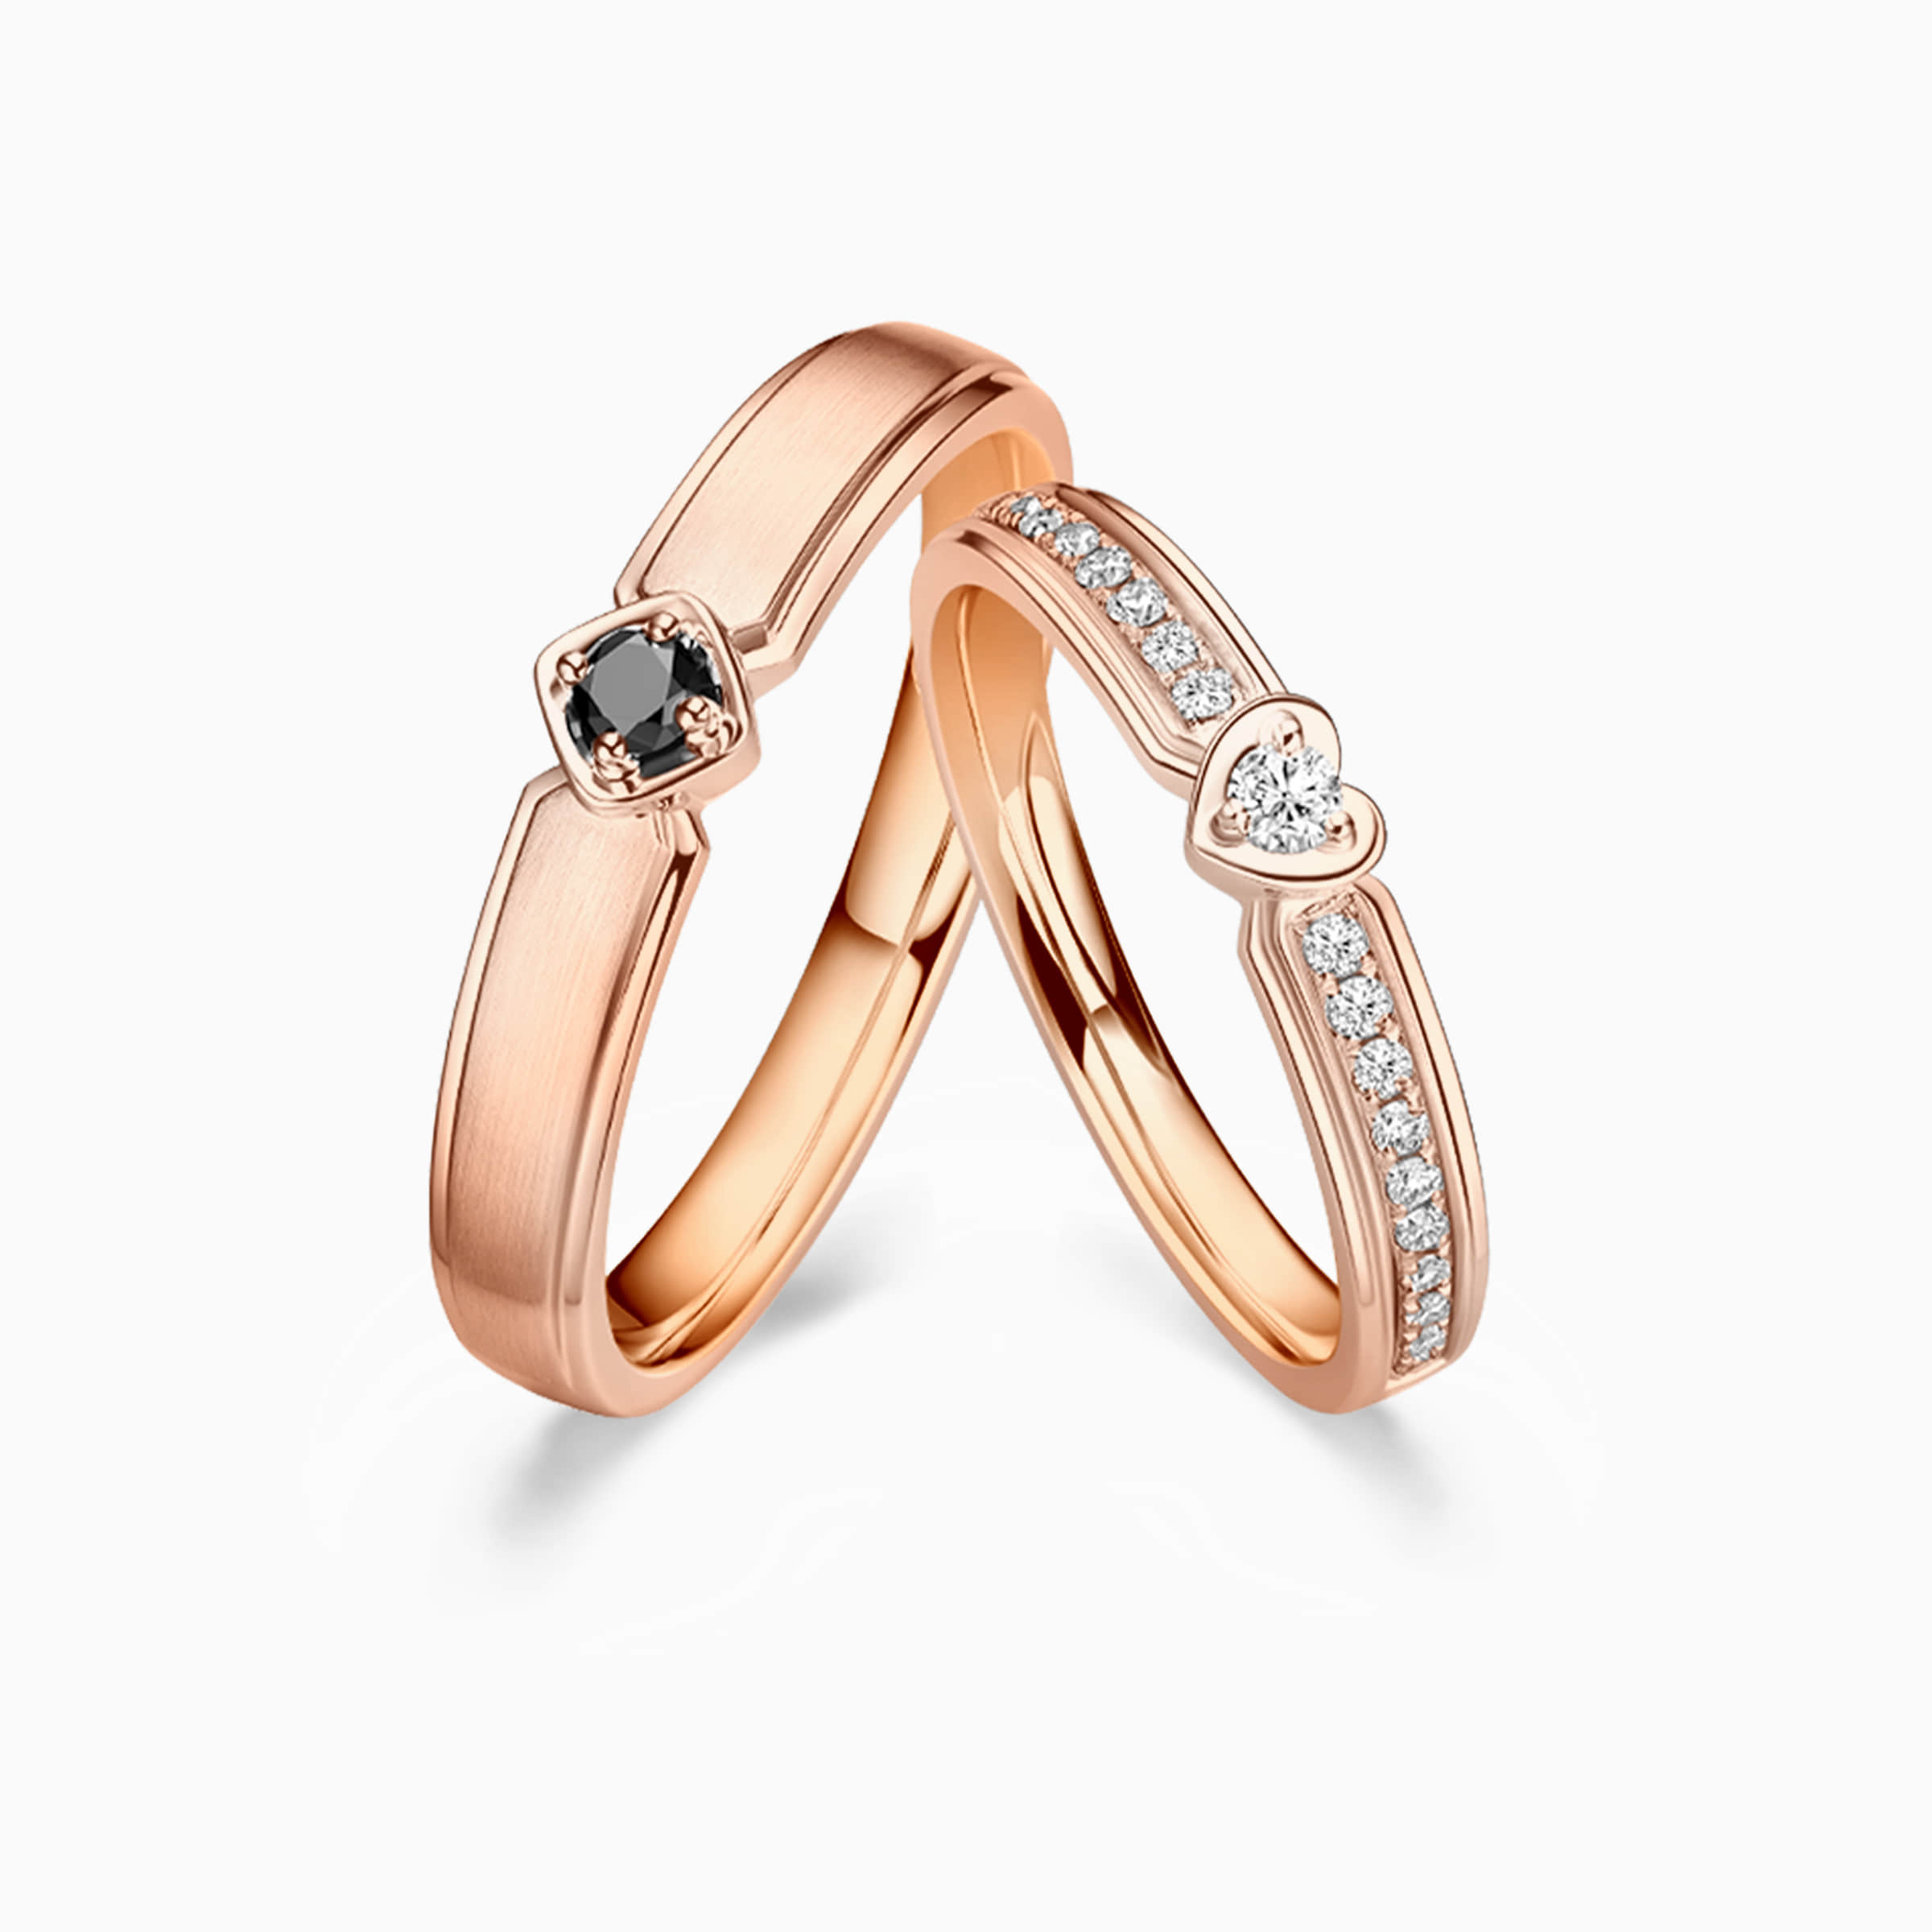 Darry Ring diamond wedding rings set for man and woman in rose gold